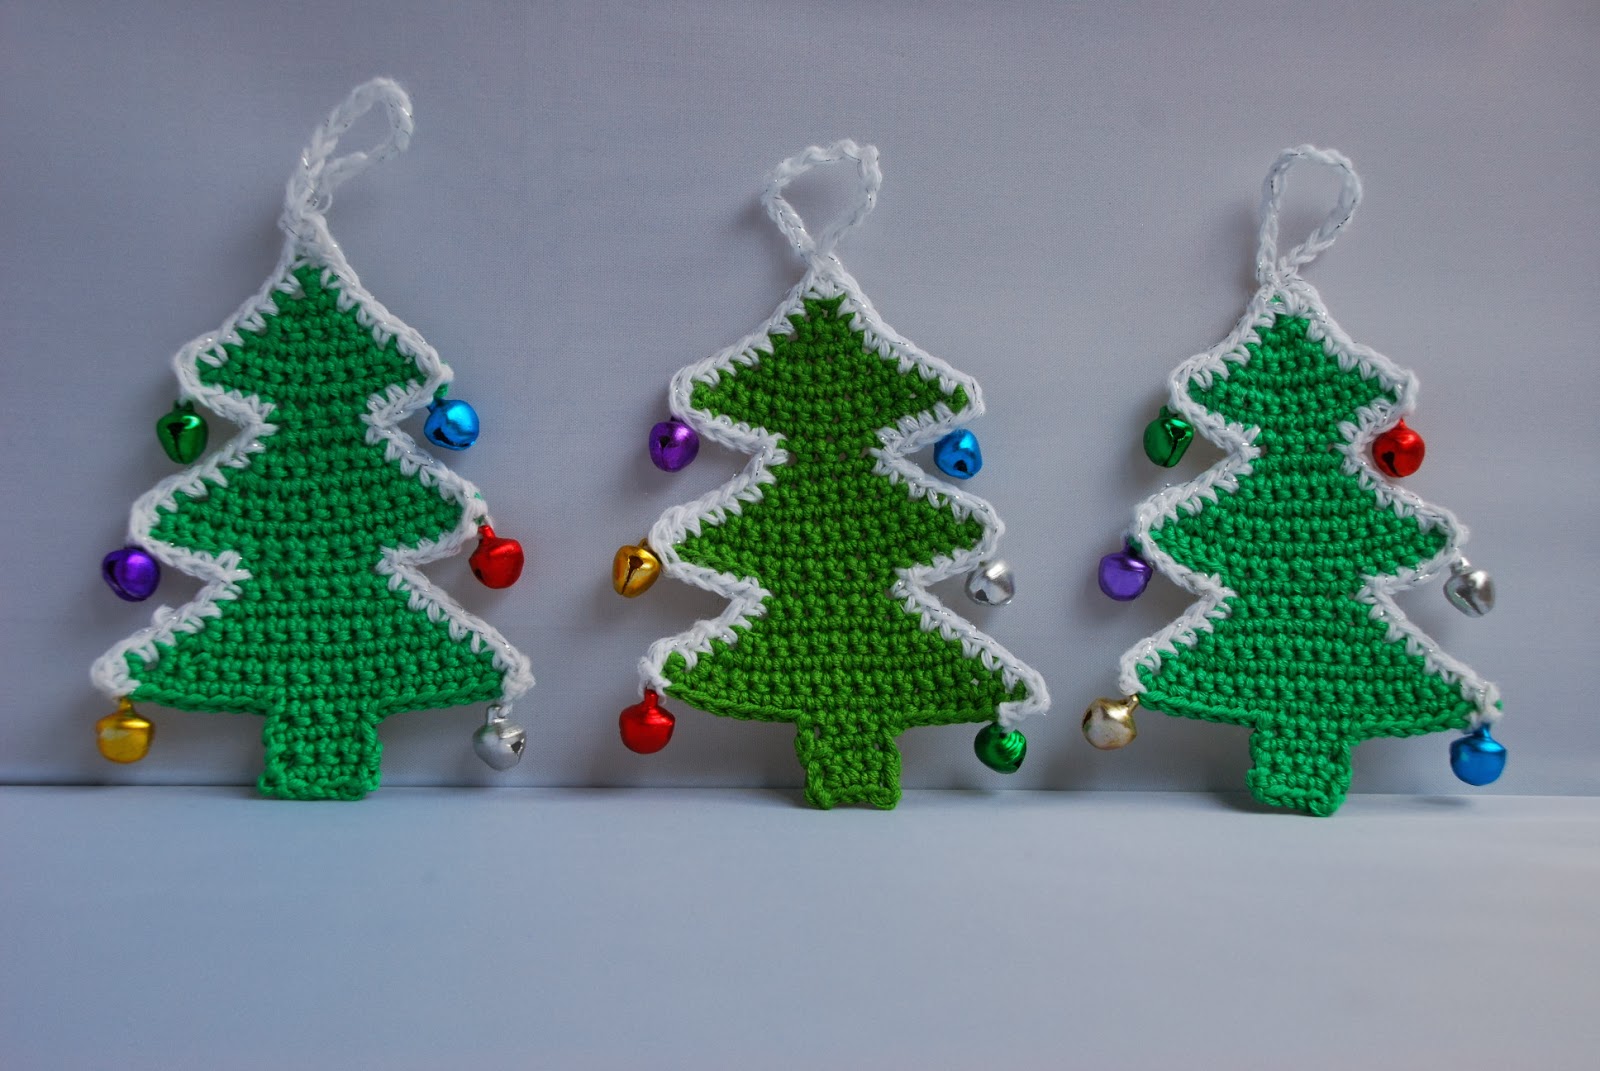 ... tree pattern and tutorial: Amjaylou designed crochet Christmas trees